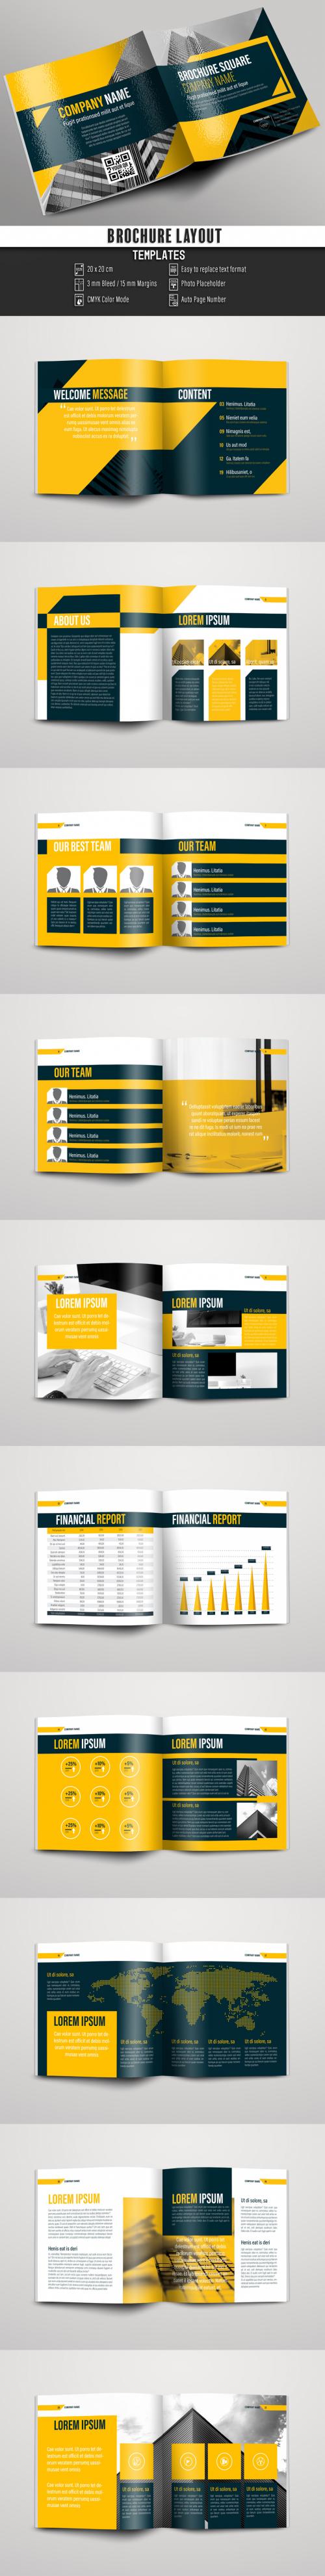 Adobe Stock - Yellow and Gray Square Brochure Layout - 180014119